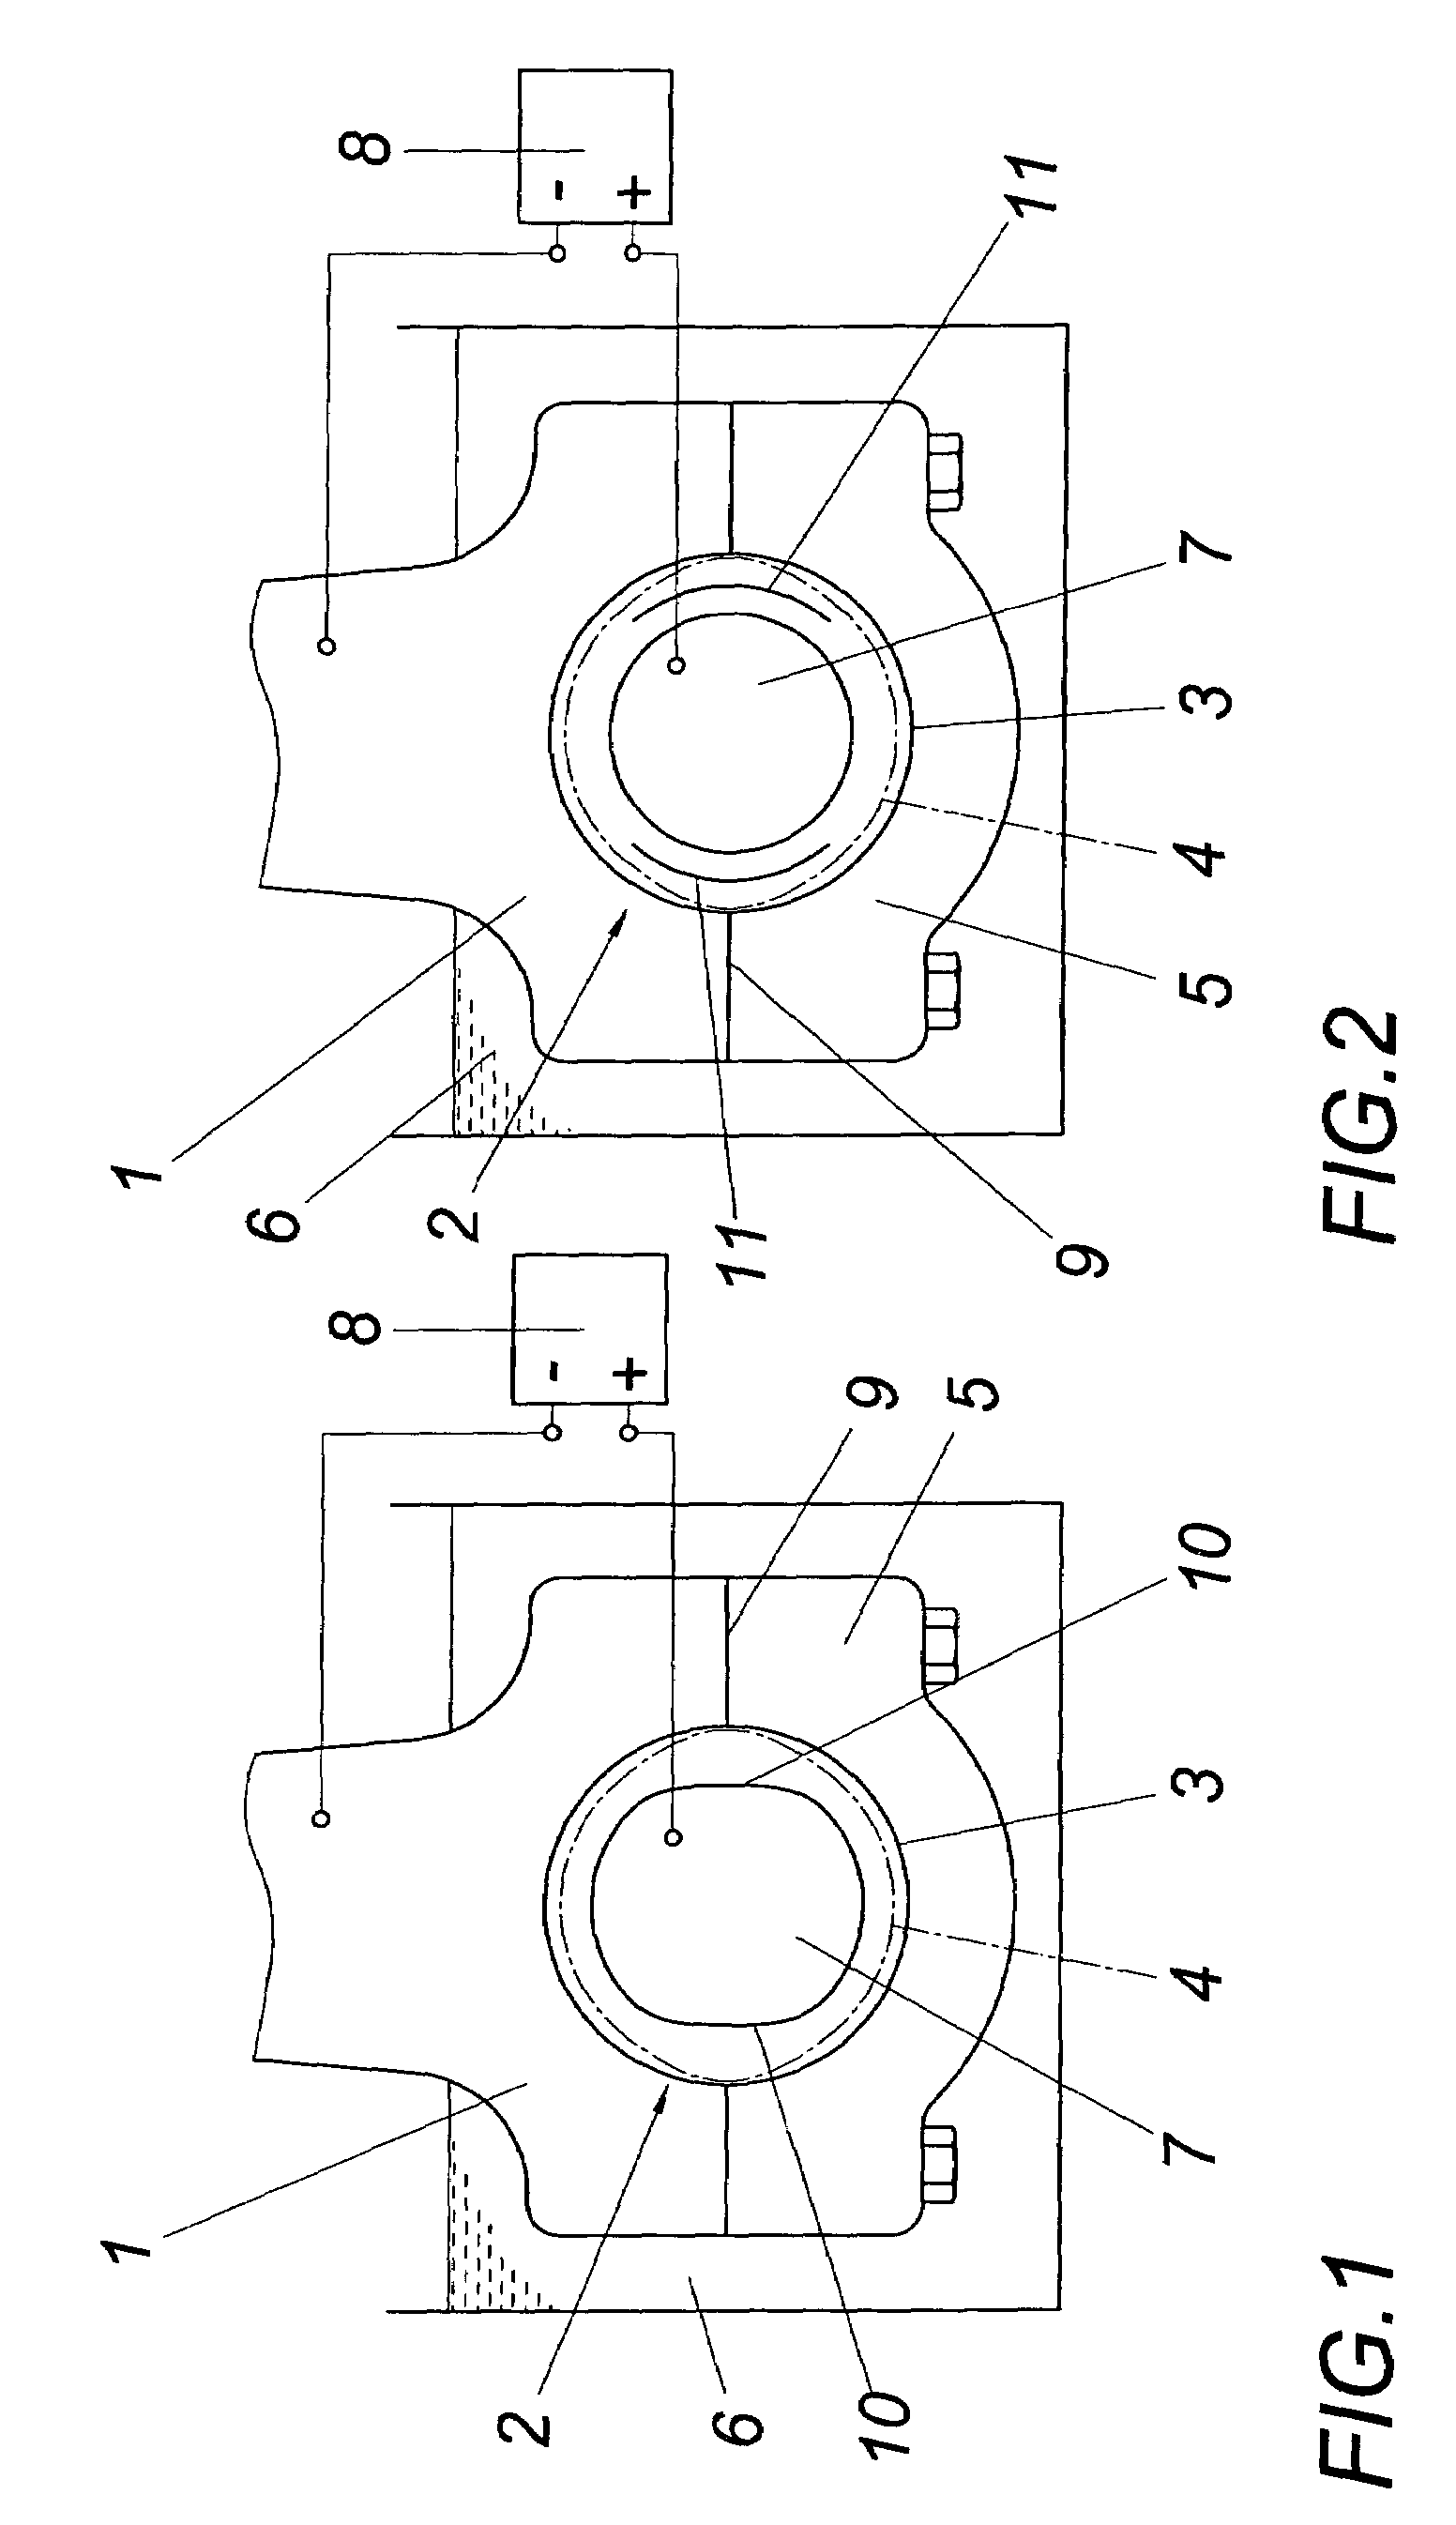 Method of producing a workpiece having at least one bearing eye